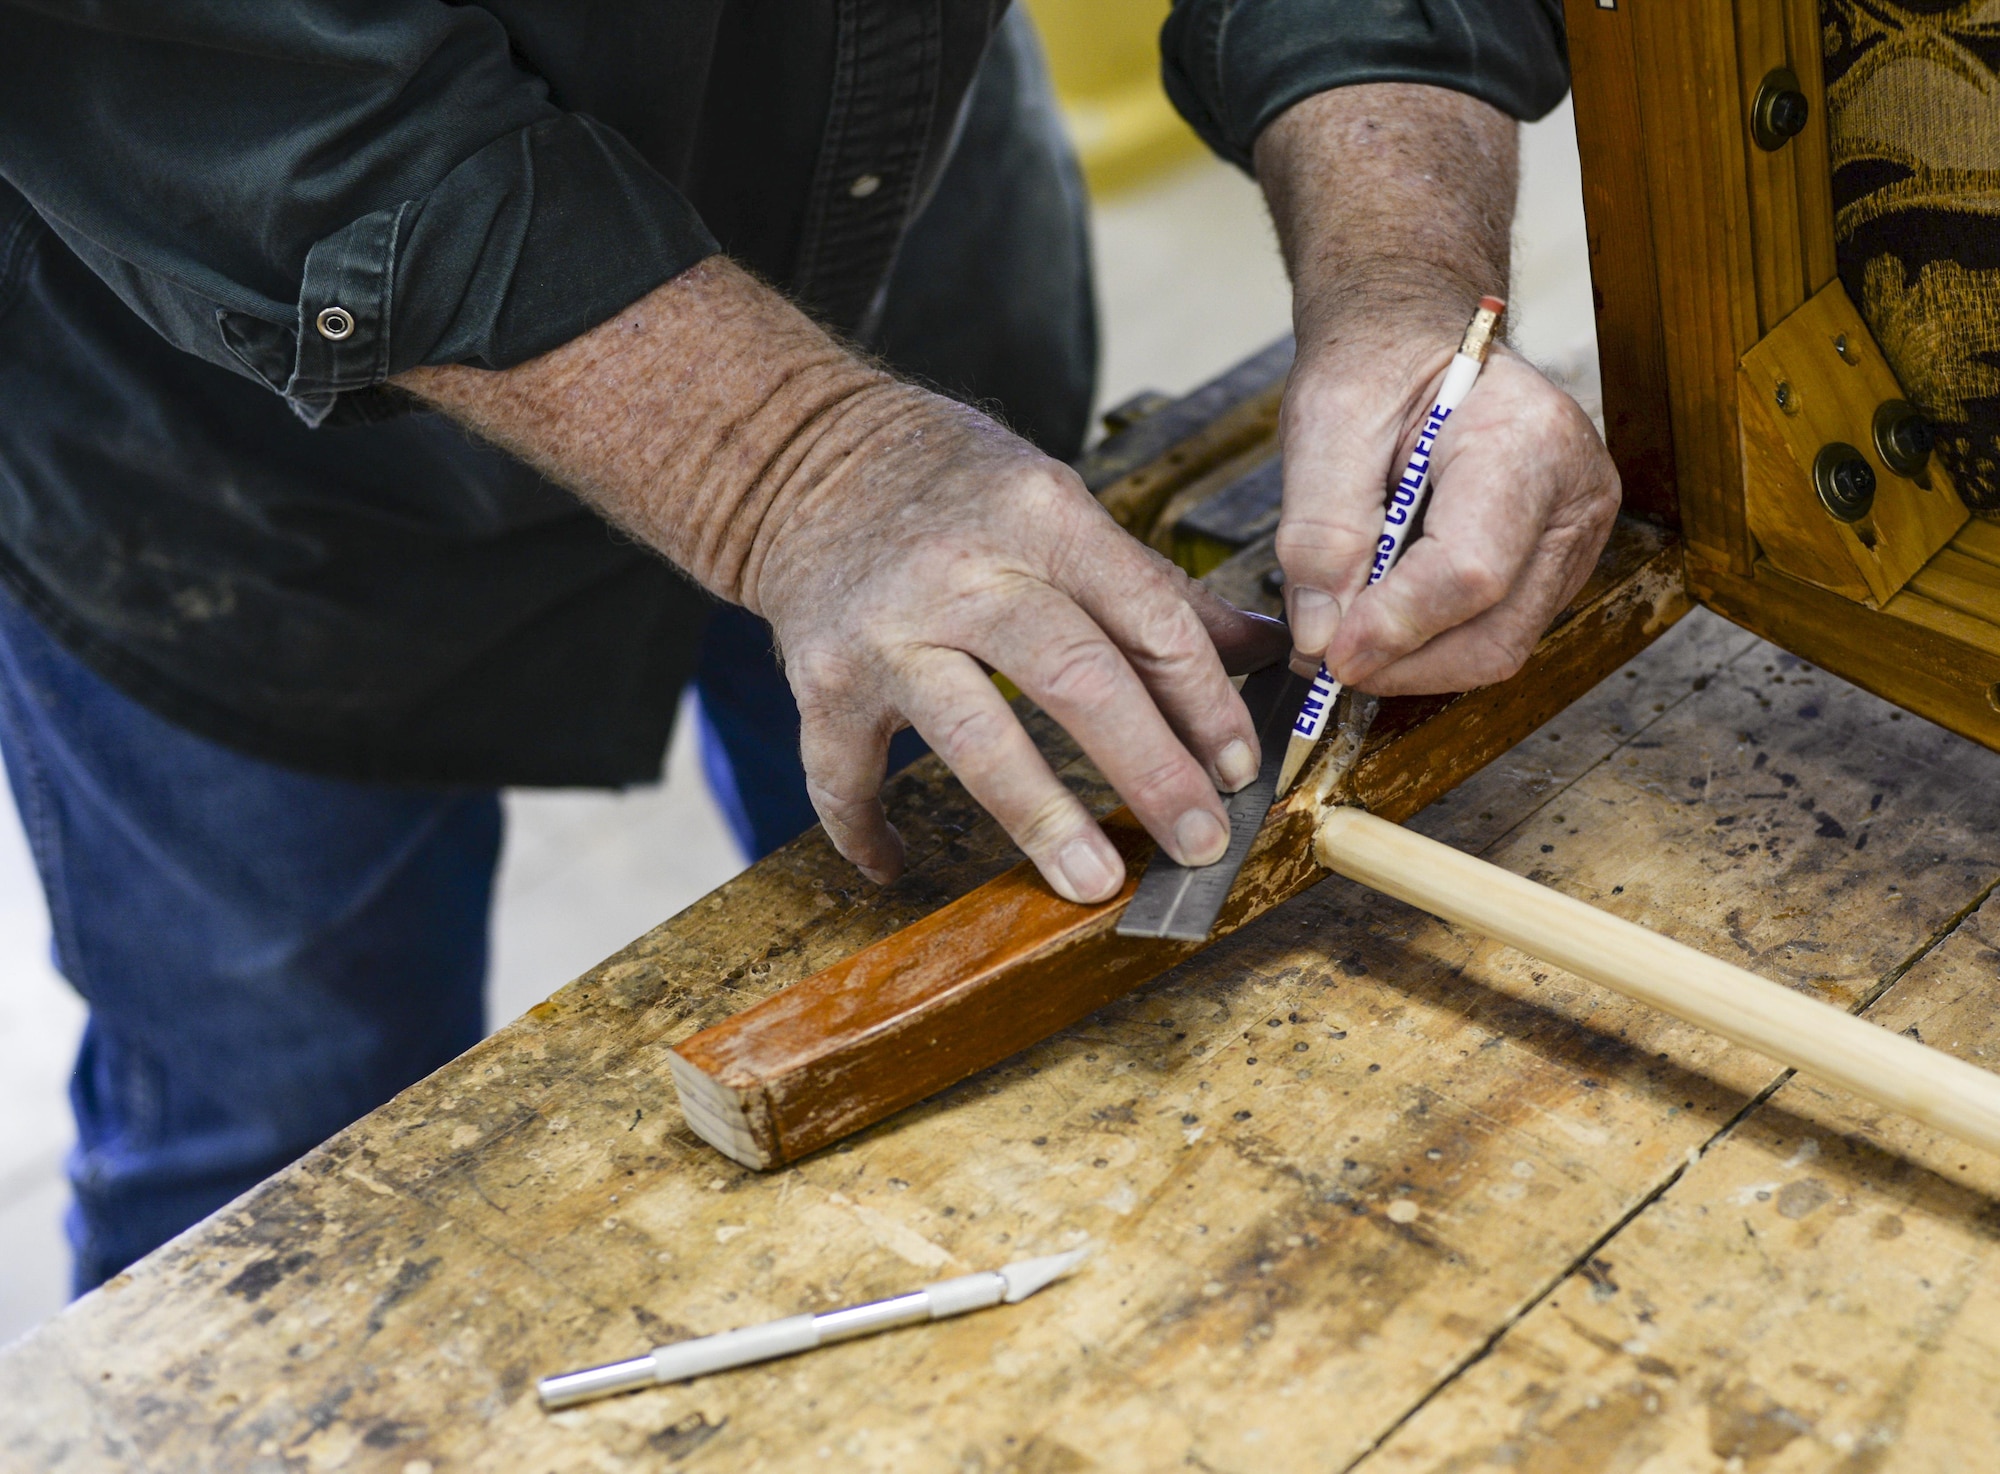 Joe, the 49th Force Support Squadron Wood Shop supervisor, repairs a broken chair at Holloman Air Force Base, N.M. 11 Aug. 2016. Airmen and civilians, age 18 and up, can pay $30 to obtain their Wood Shop certification. (Last names are being withheld due to operational requirements. U.S. Air Force photo by Airman Alexis P. Docherty) 